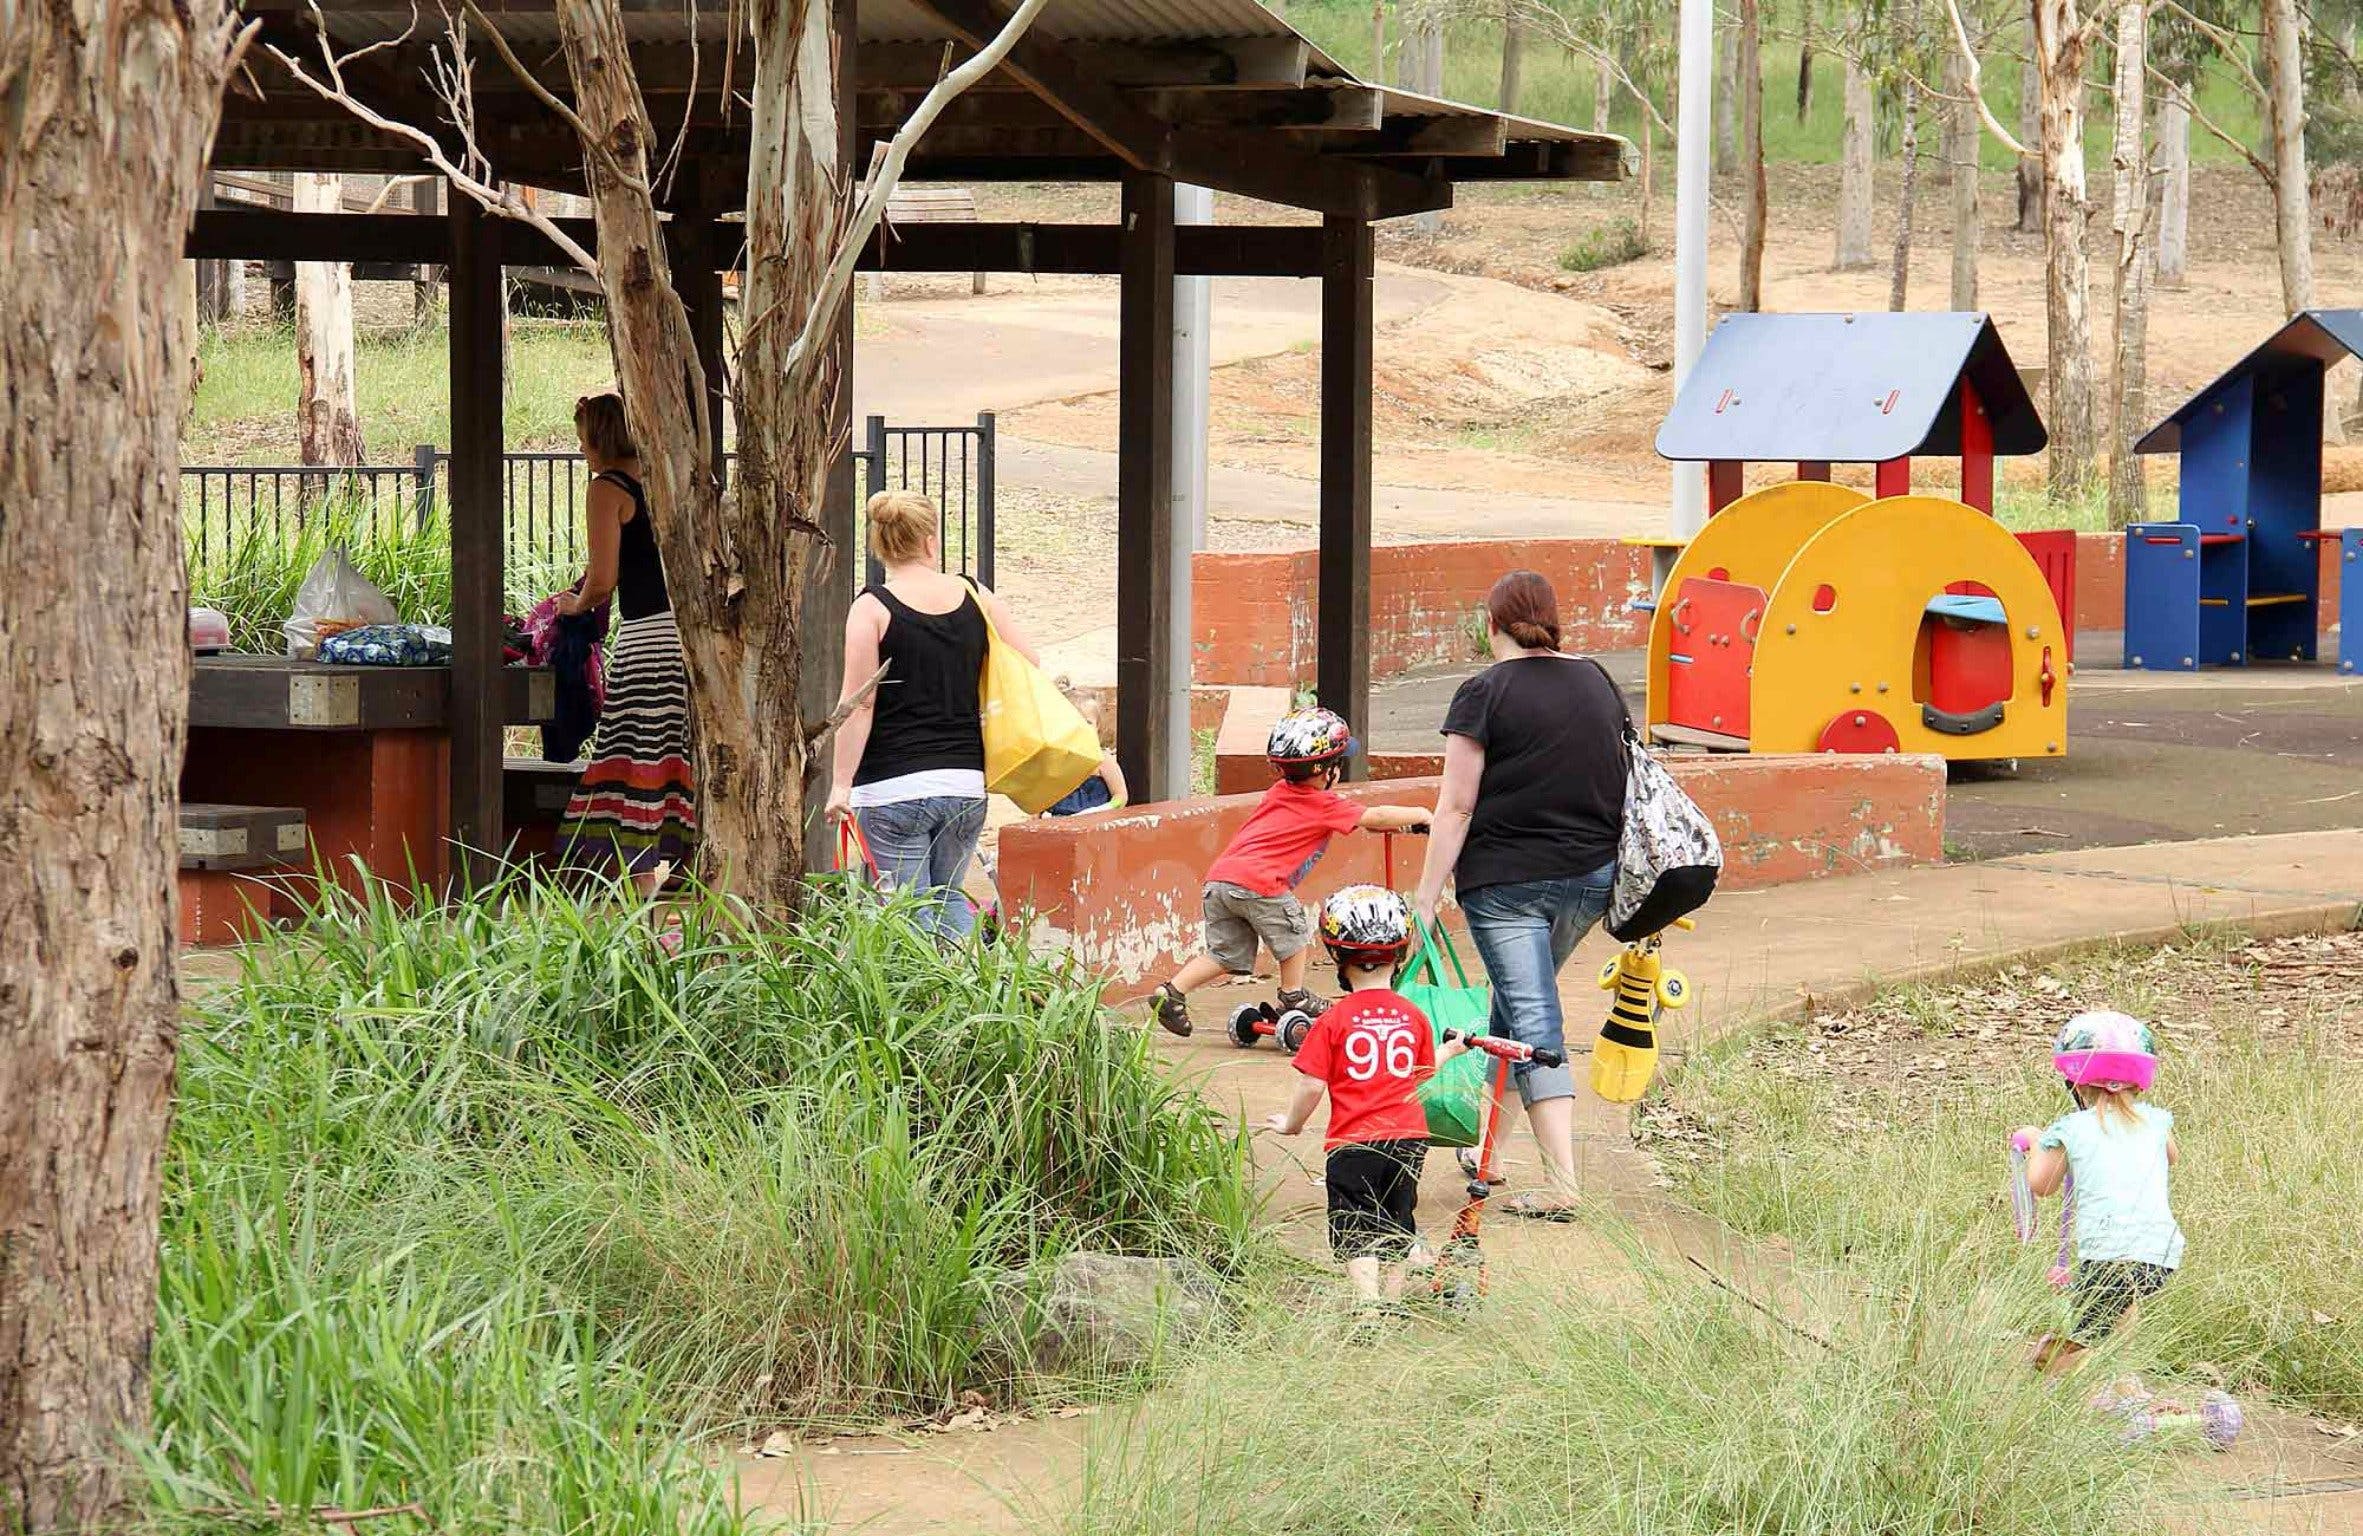 Rouse Hill picnic area and playground Logo and Images